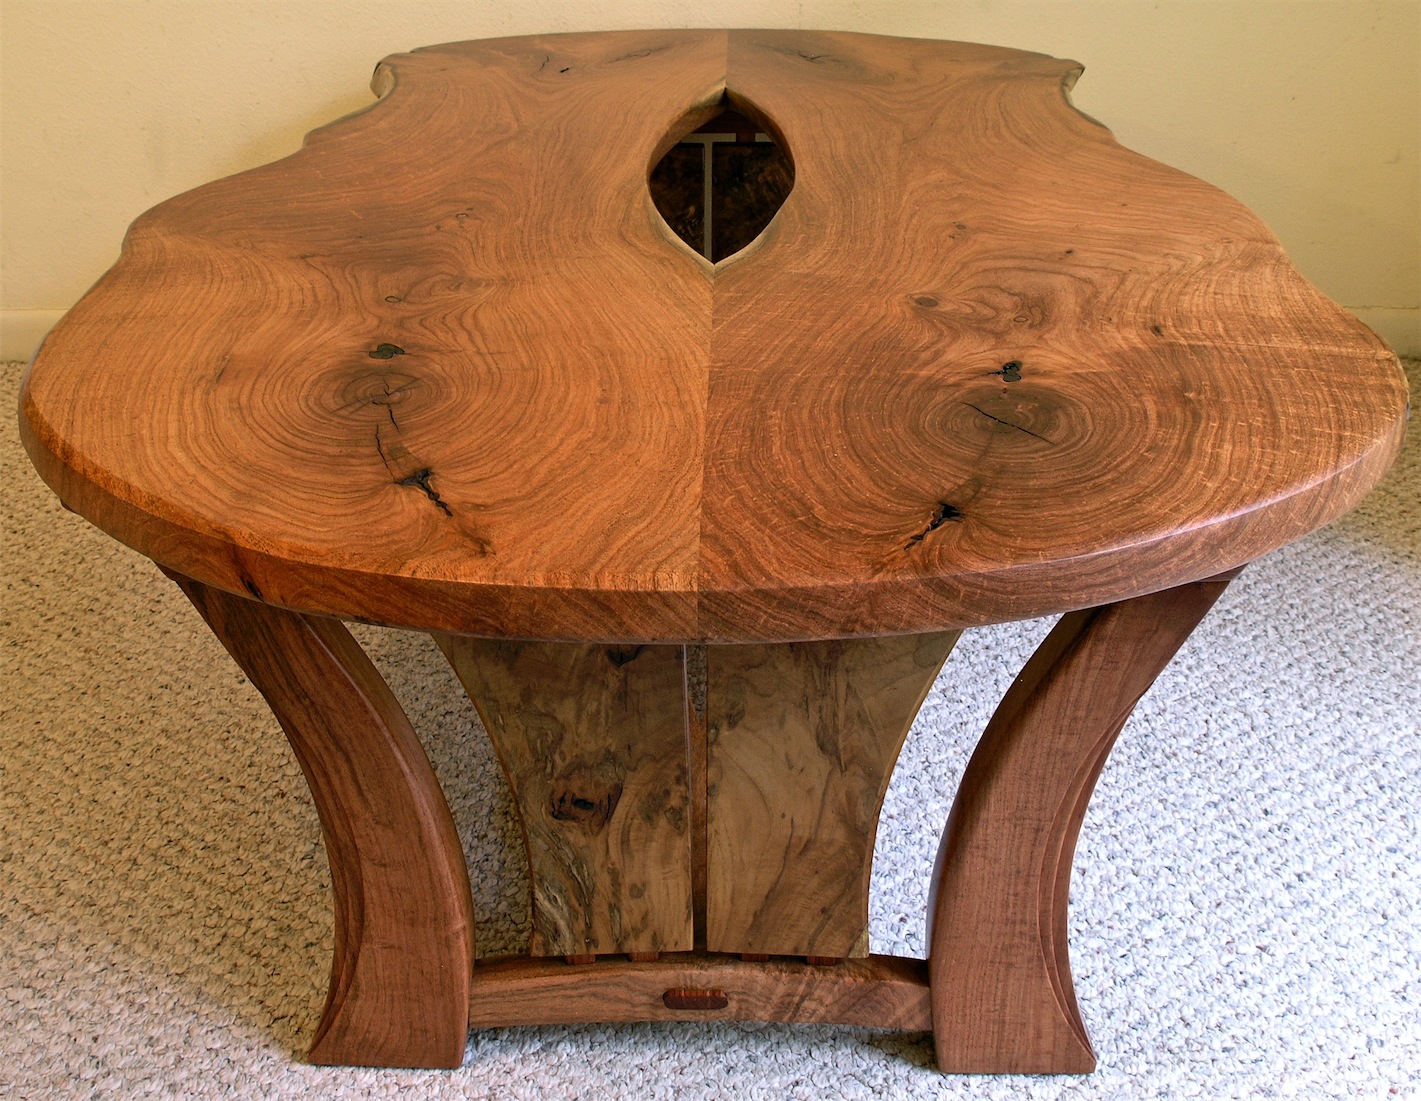 Woodworking live edge coffee table plans PDF Free Download